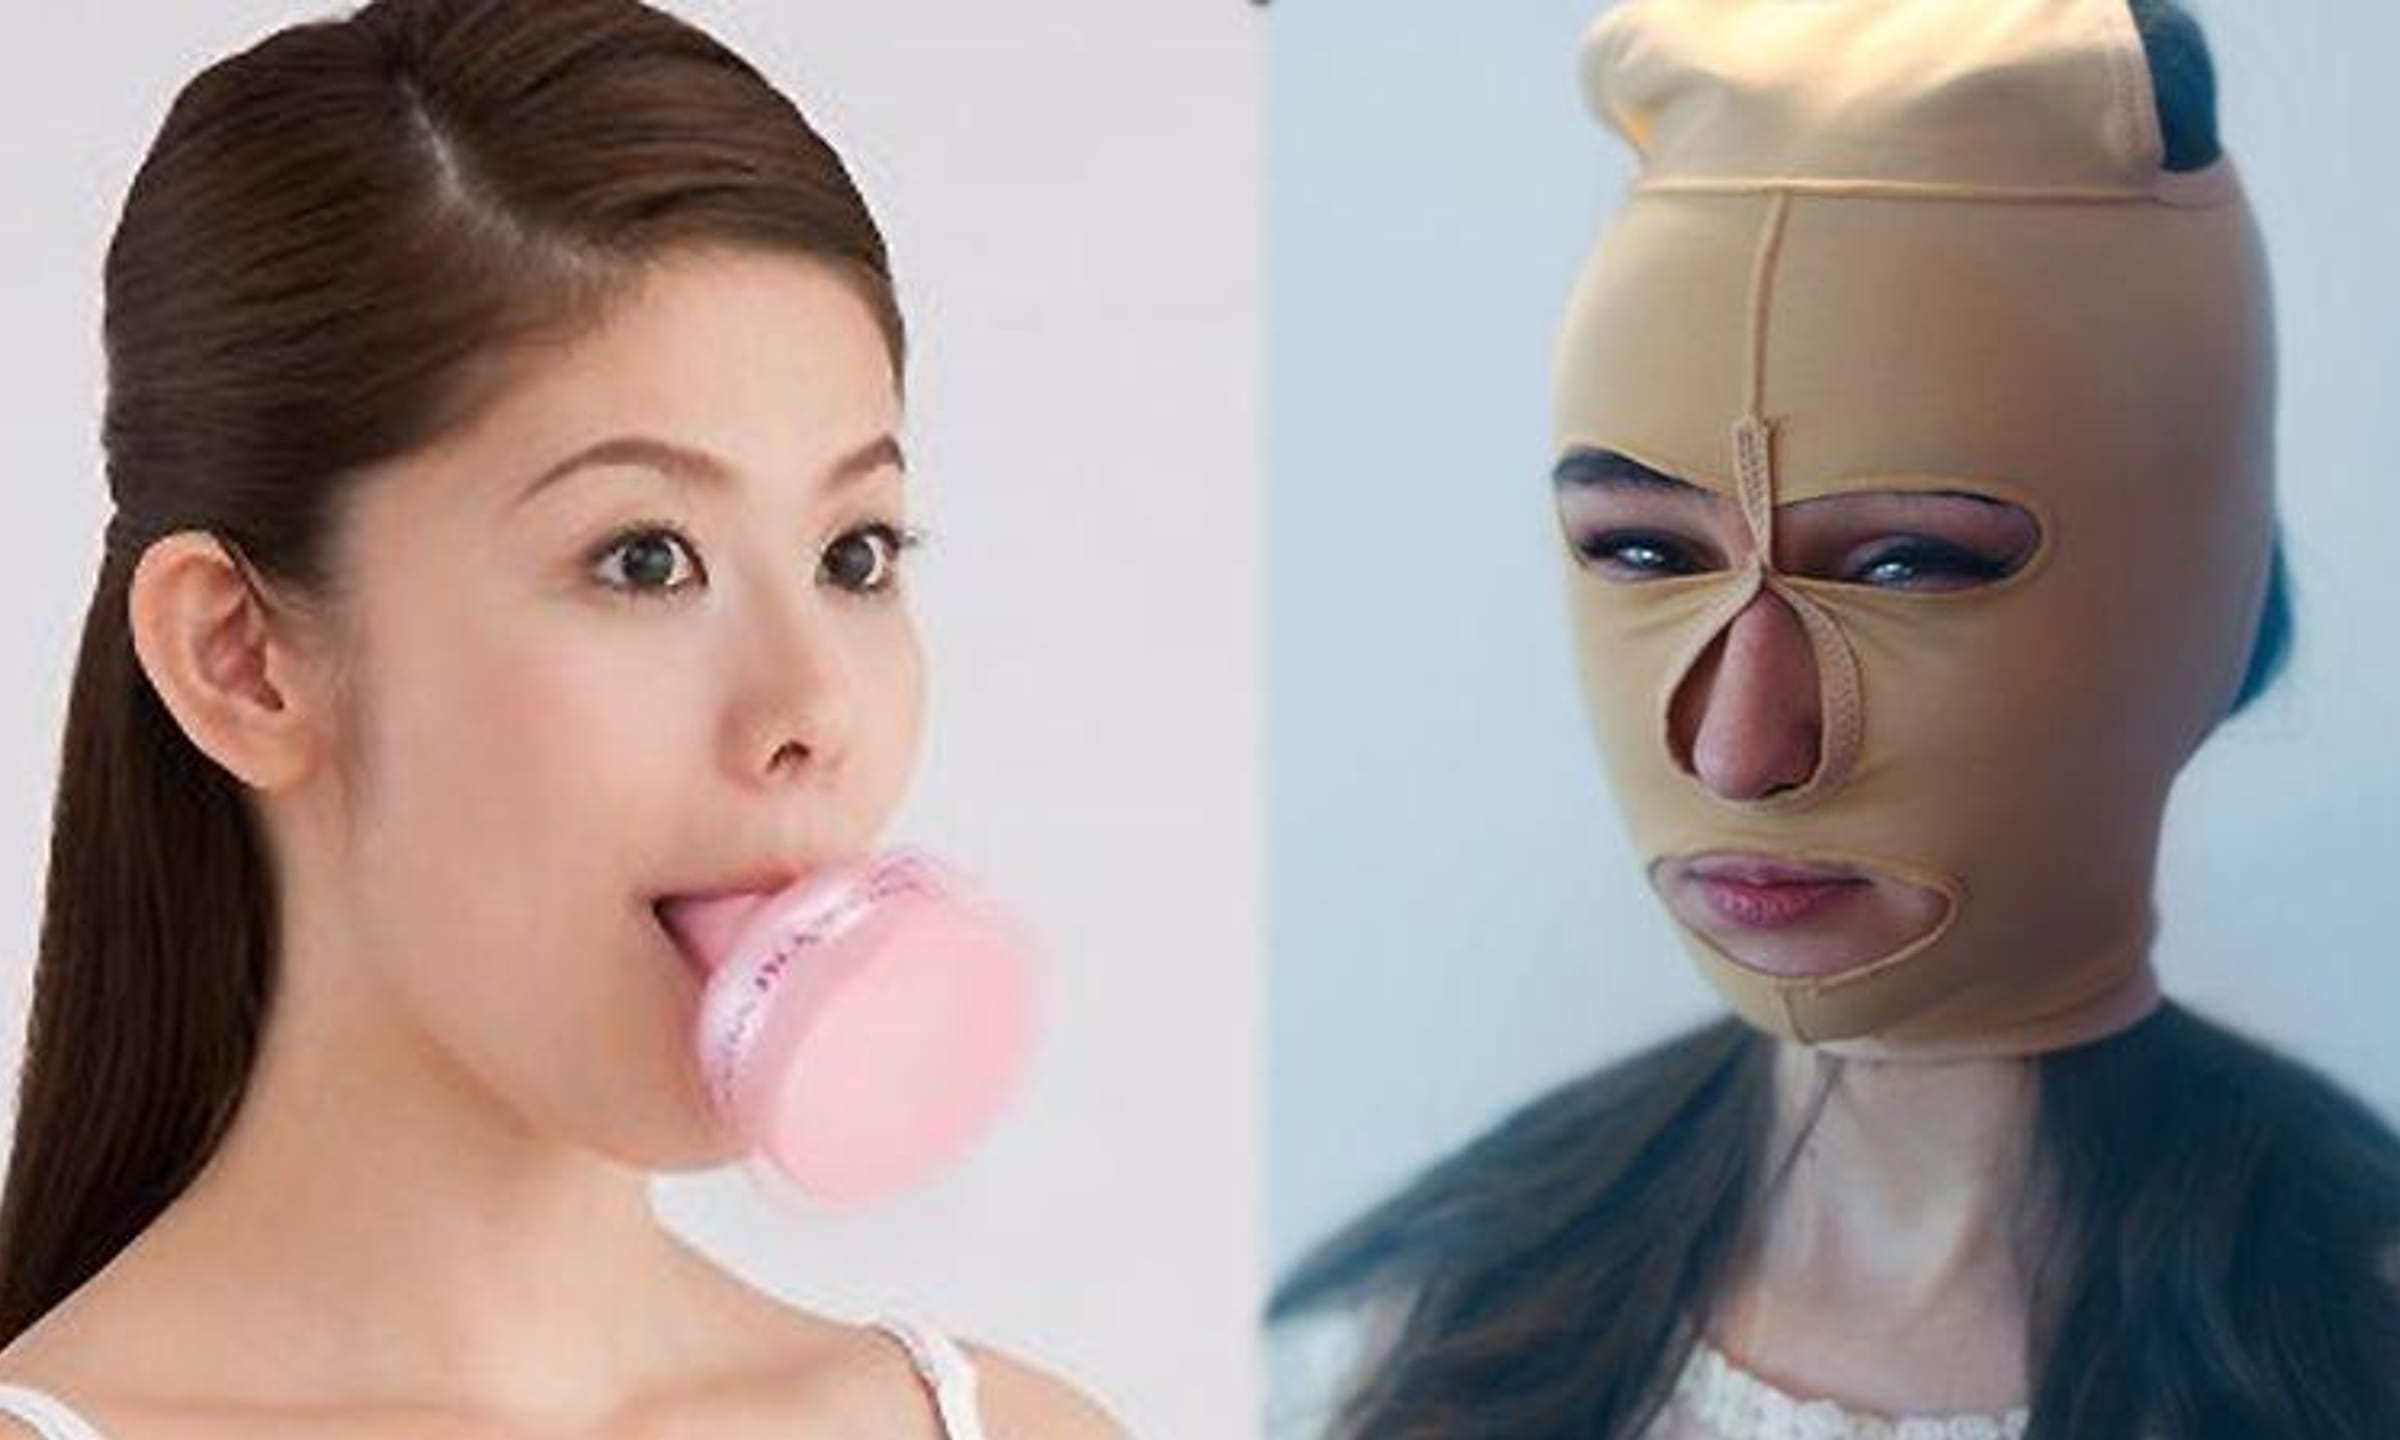 19 Weird Beauty Gadgets That Make You Glam Without Plastic Surgery